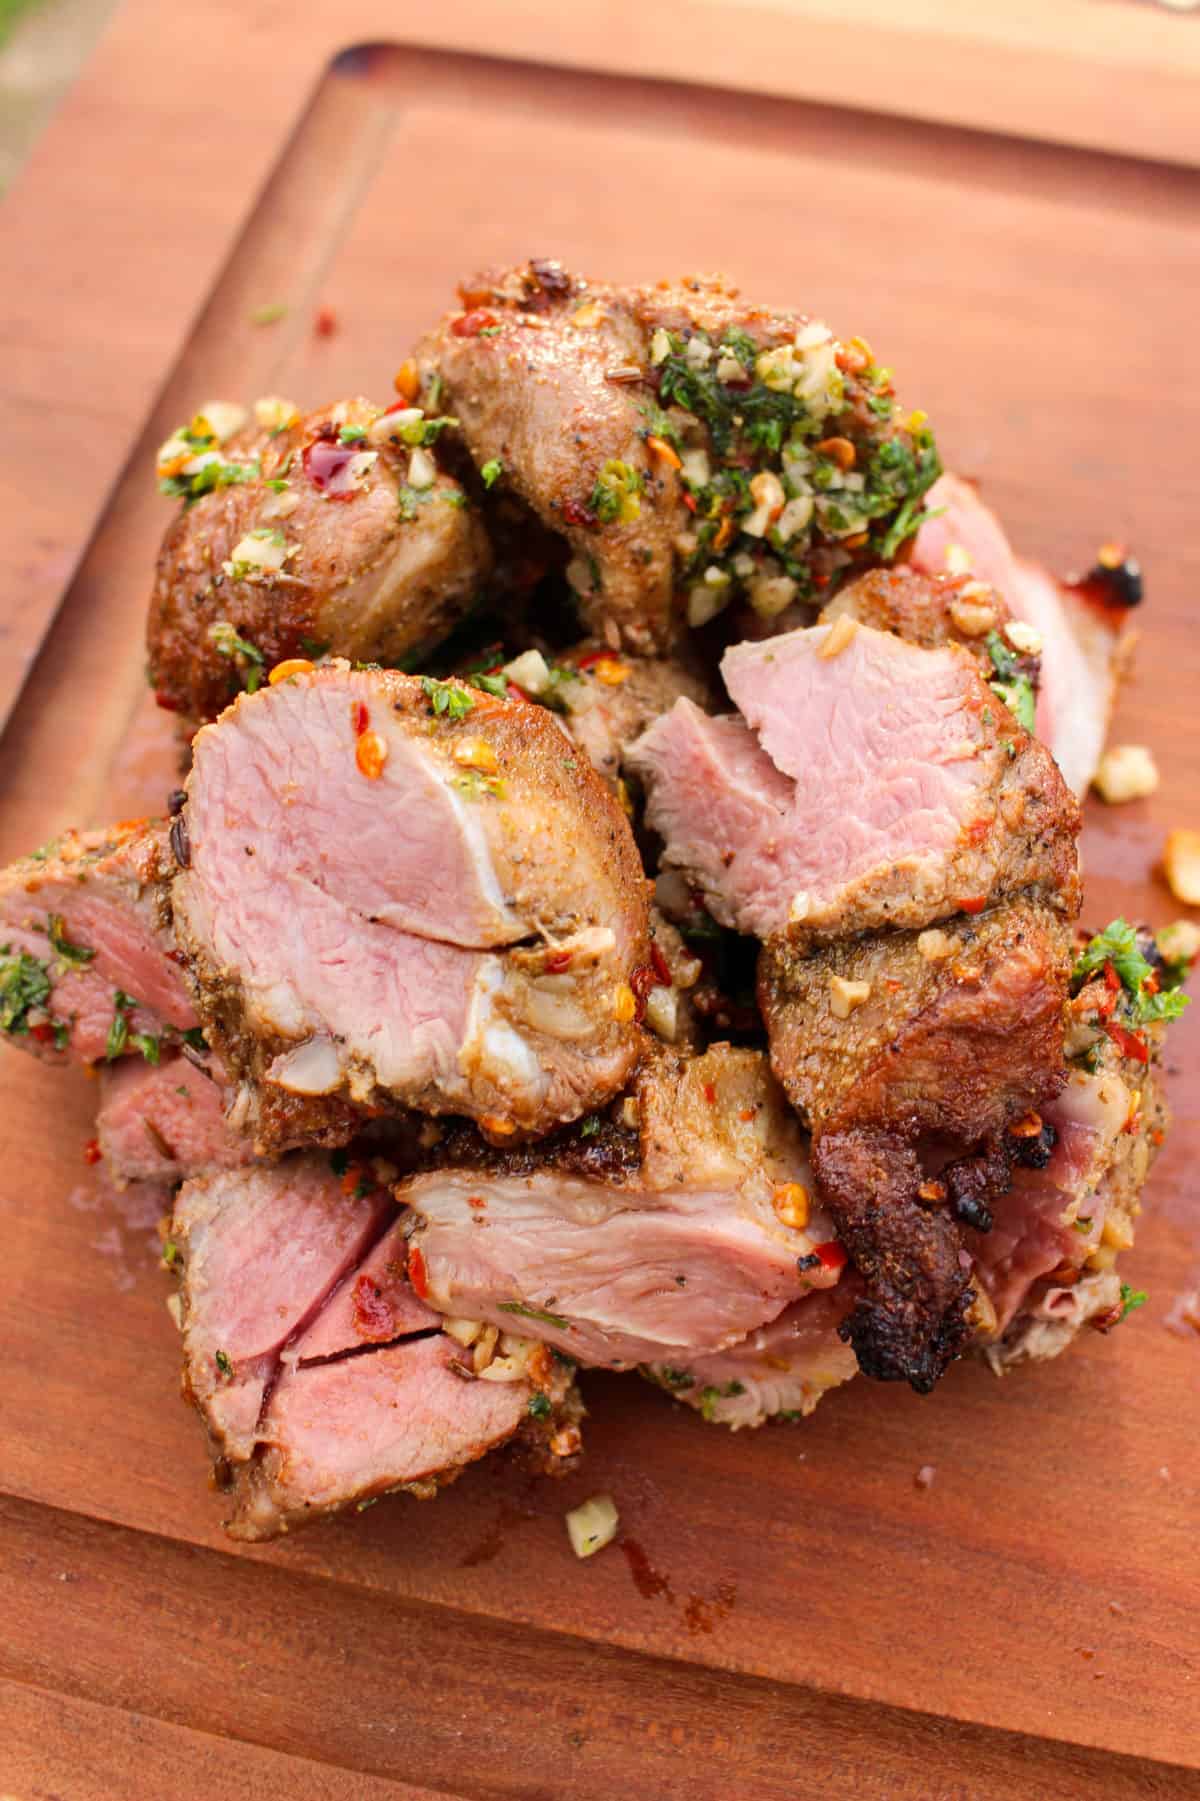 Lamb is sliced and served!